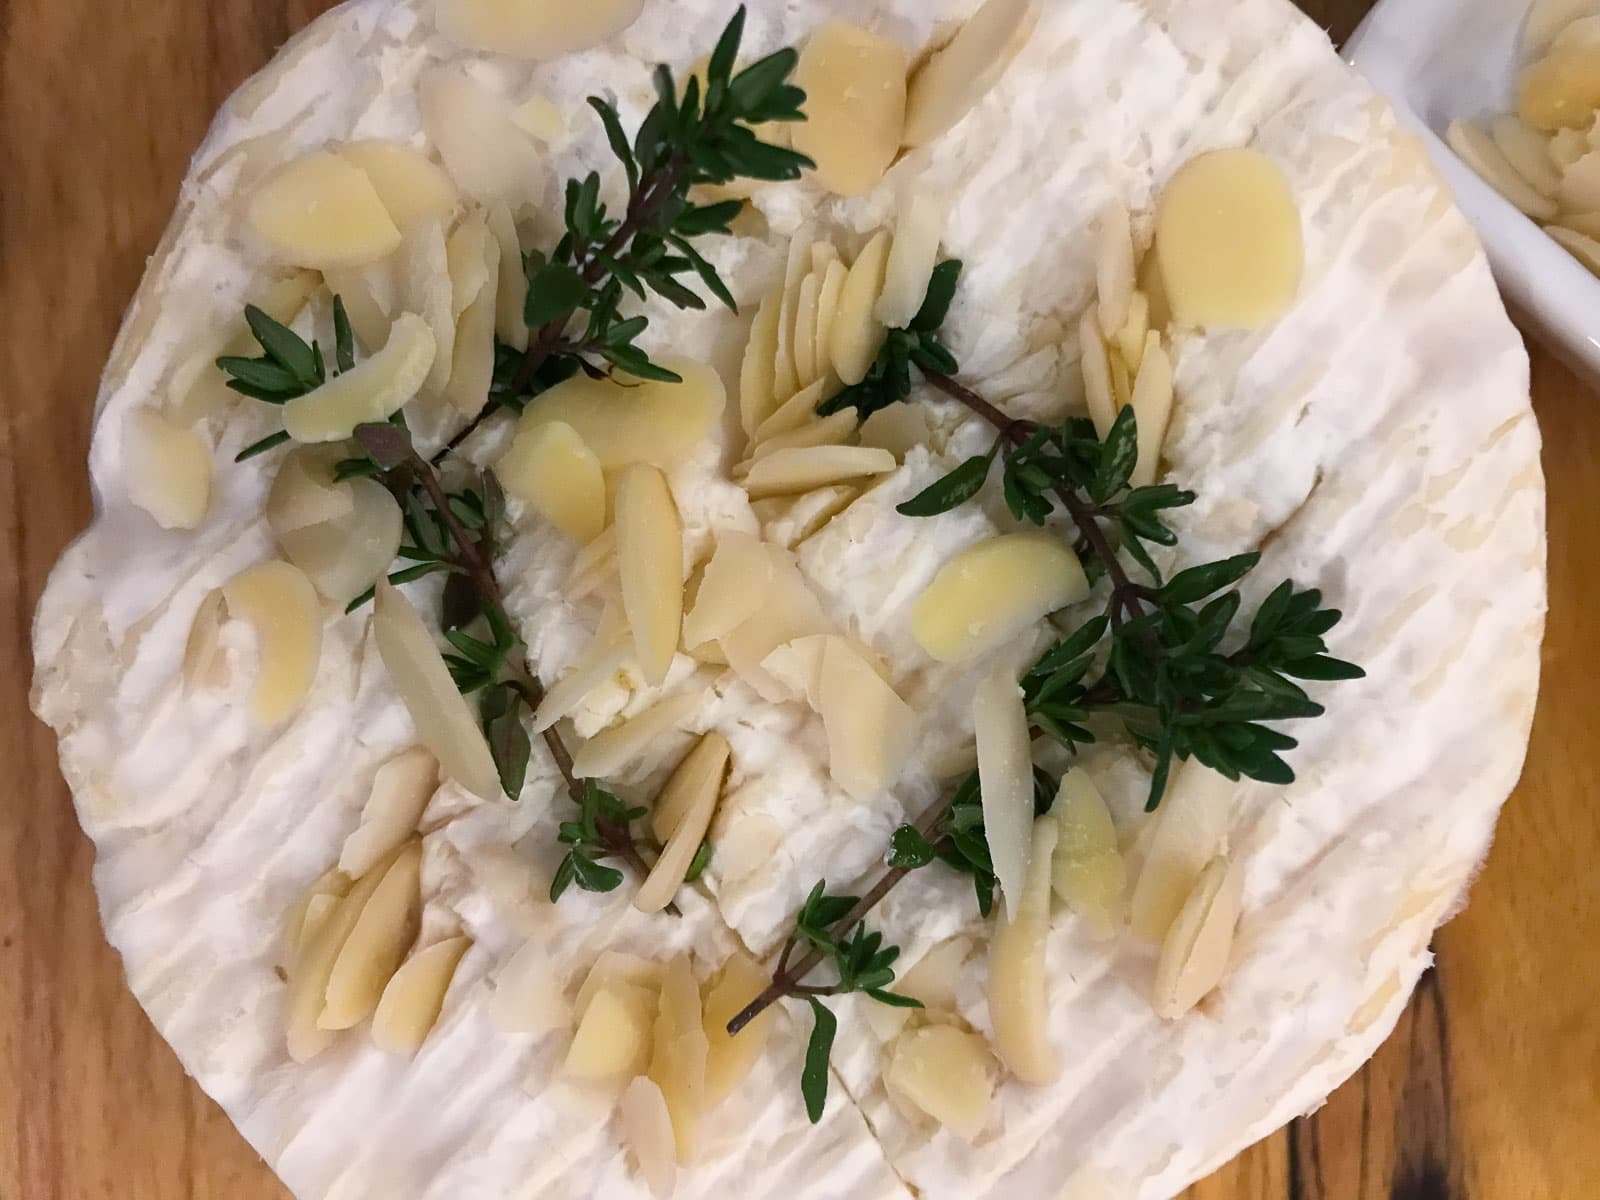 A whole camembert stuffed with fresh thyme leaves, sliced almonds on a wooden board.